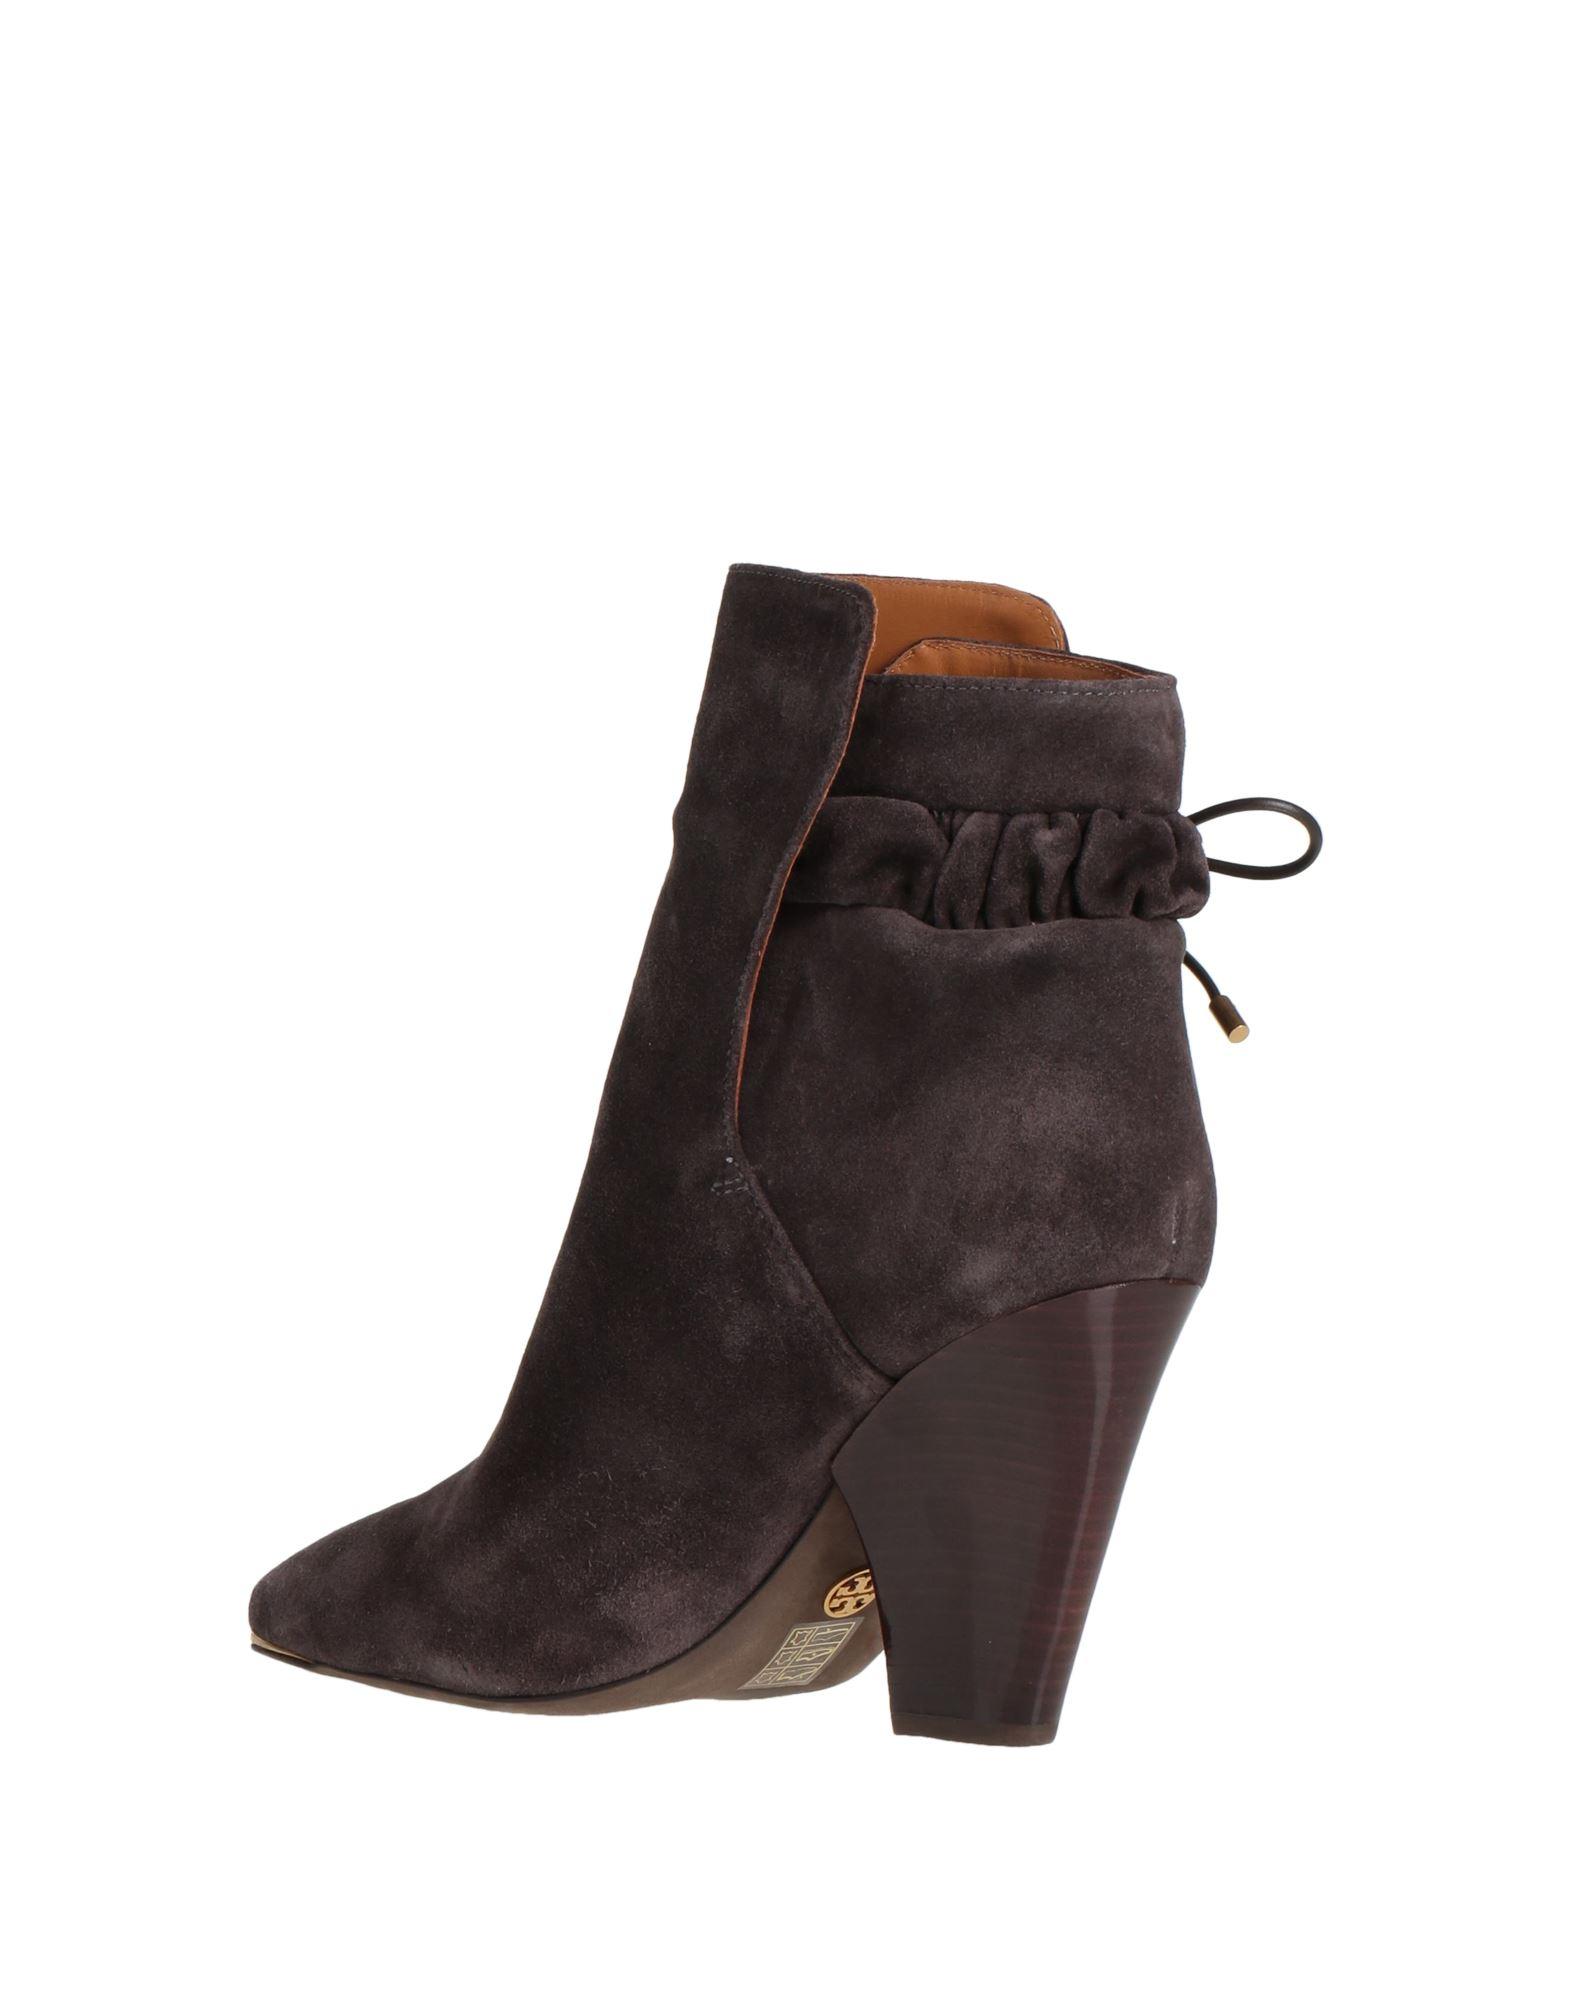 Tory Burch Ankle Boots in Brown | Lyst